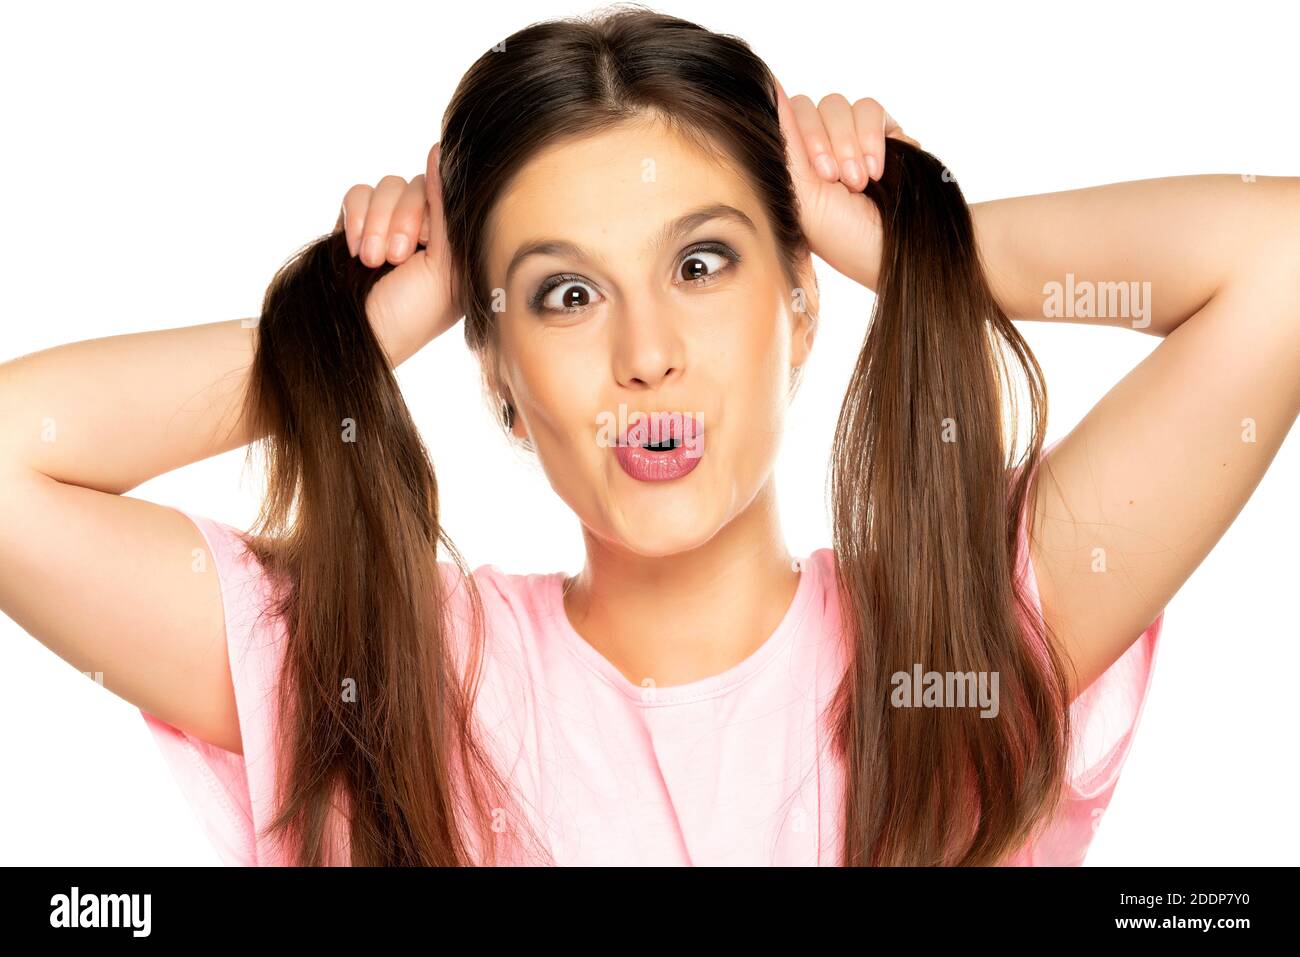 Young funny woman with pony tails make a faces on white background Stock Photo